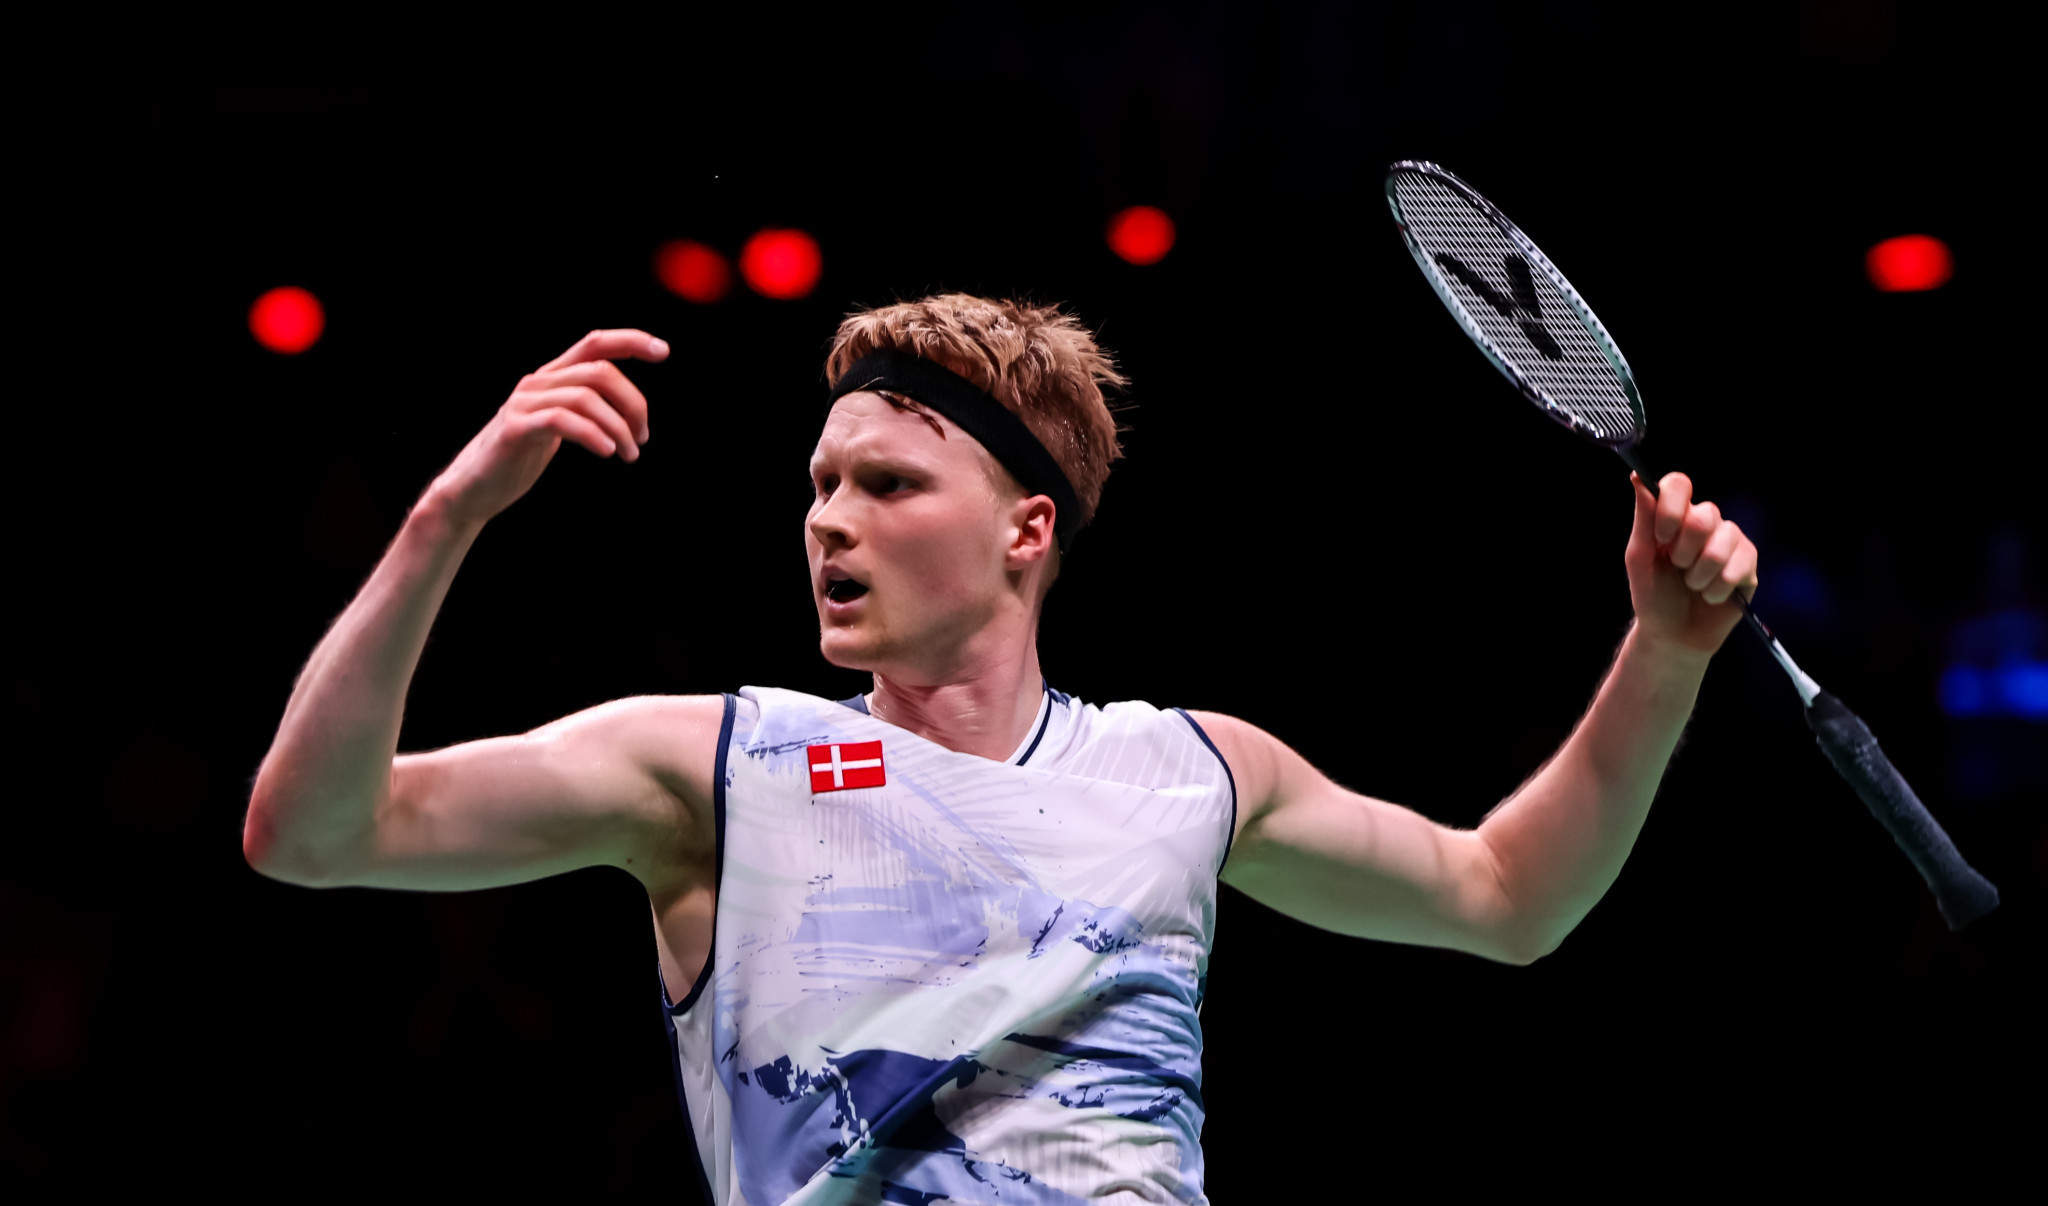 Copenhagen is holding the Badminton World Federation World Championships for a fifth time ©Badmintonphoto